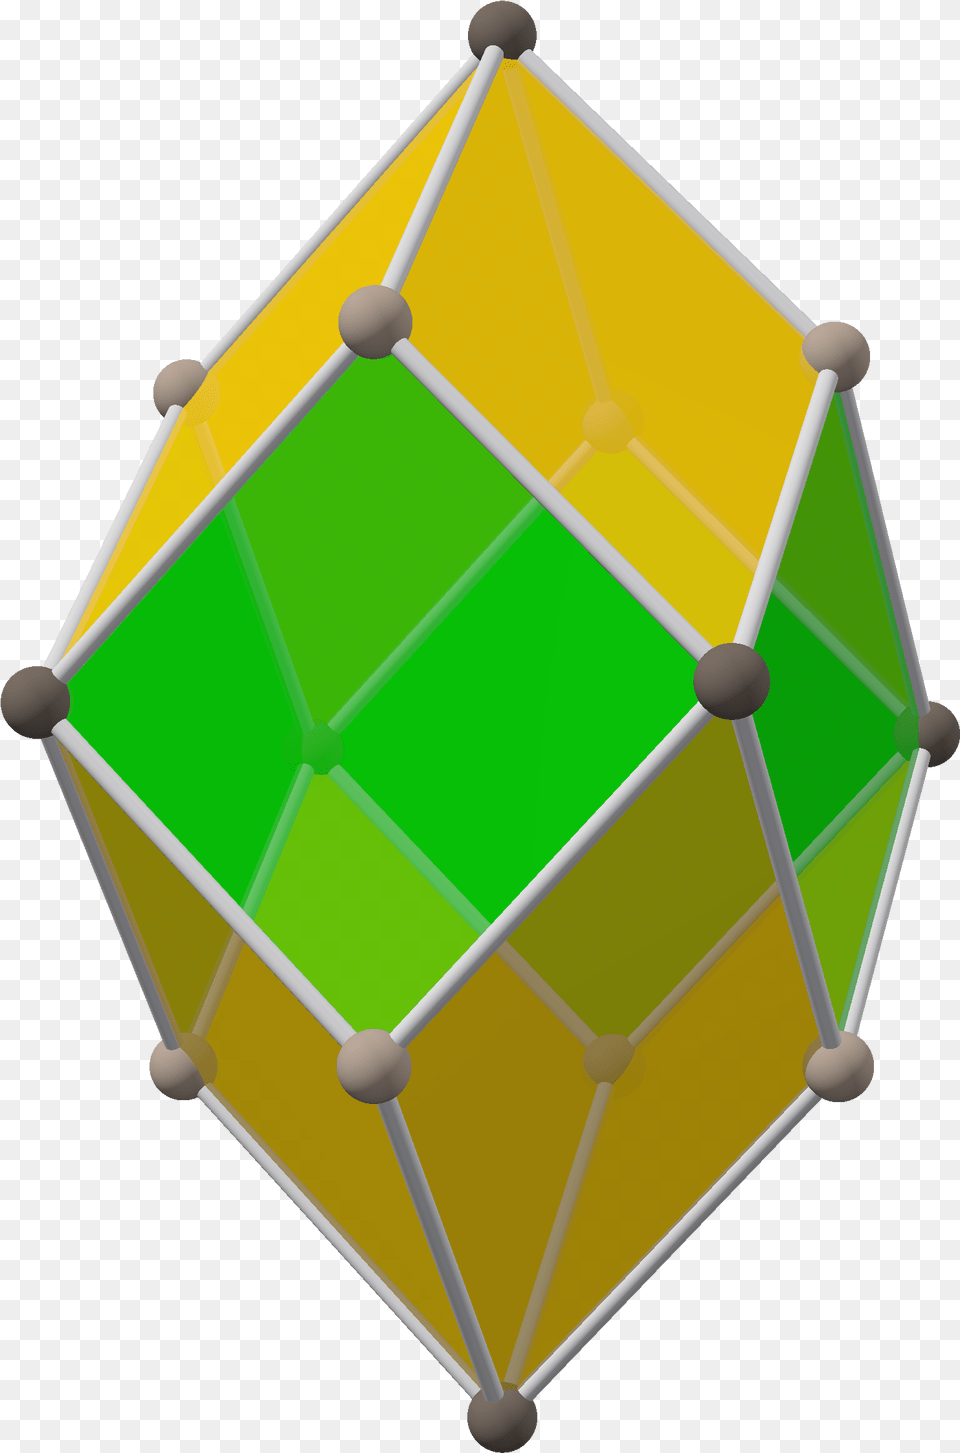 Concertina Tesseract Cell Mechanical Puzzle, Sphere, Chandelier, Lamp, Toy Png